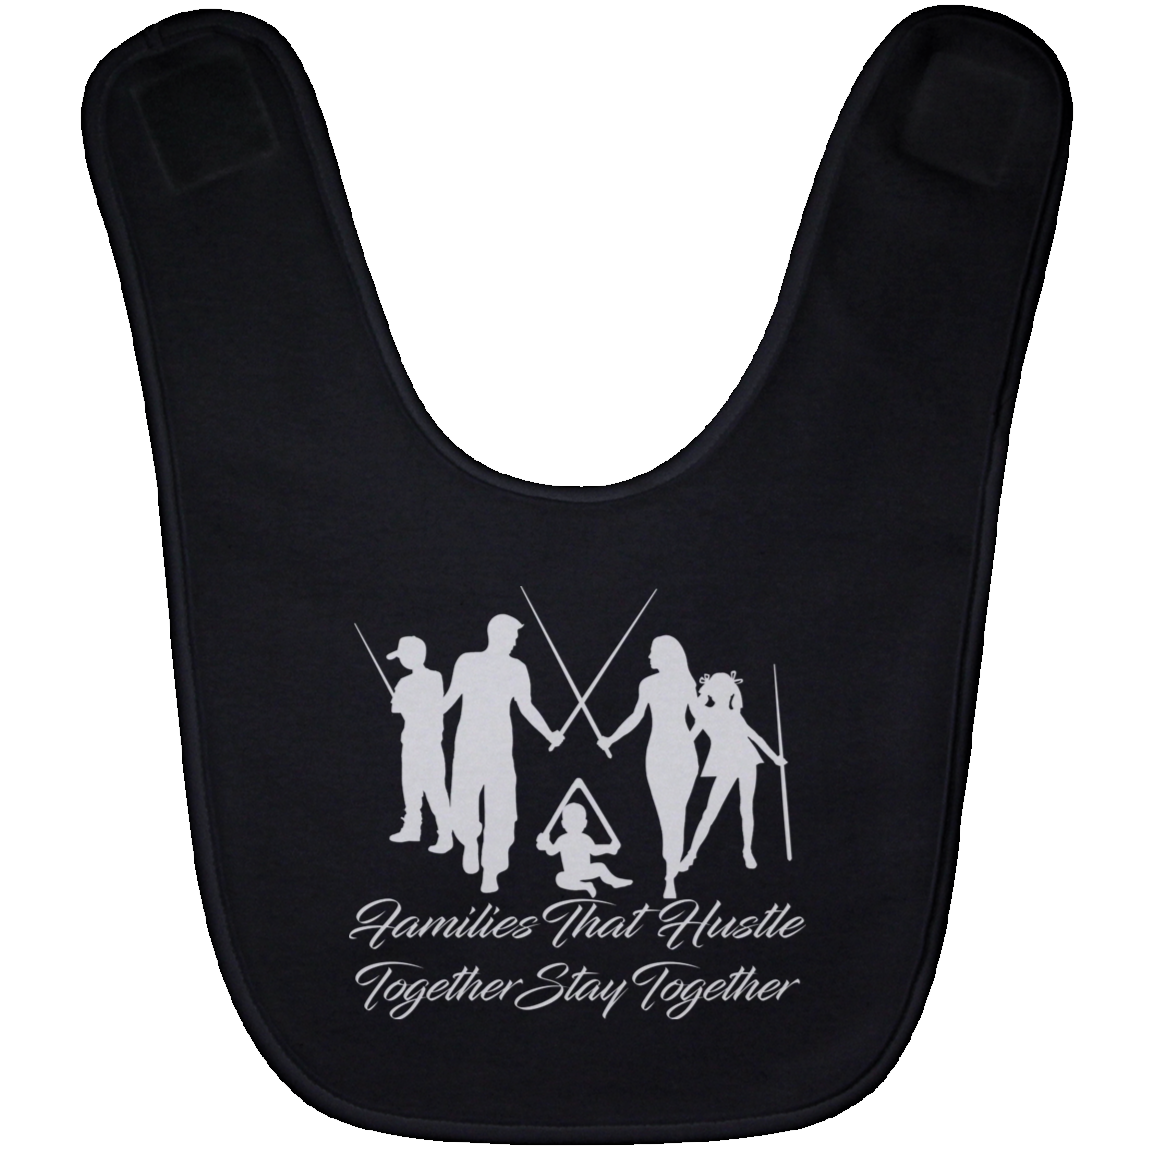 The GHOATS Custom Design. #11 Families That Hustle Together, Stay Together. Baby Bib